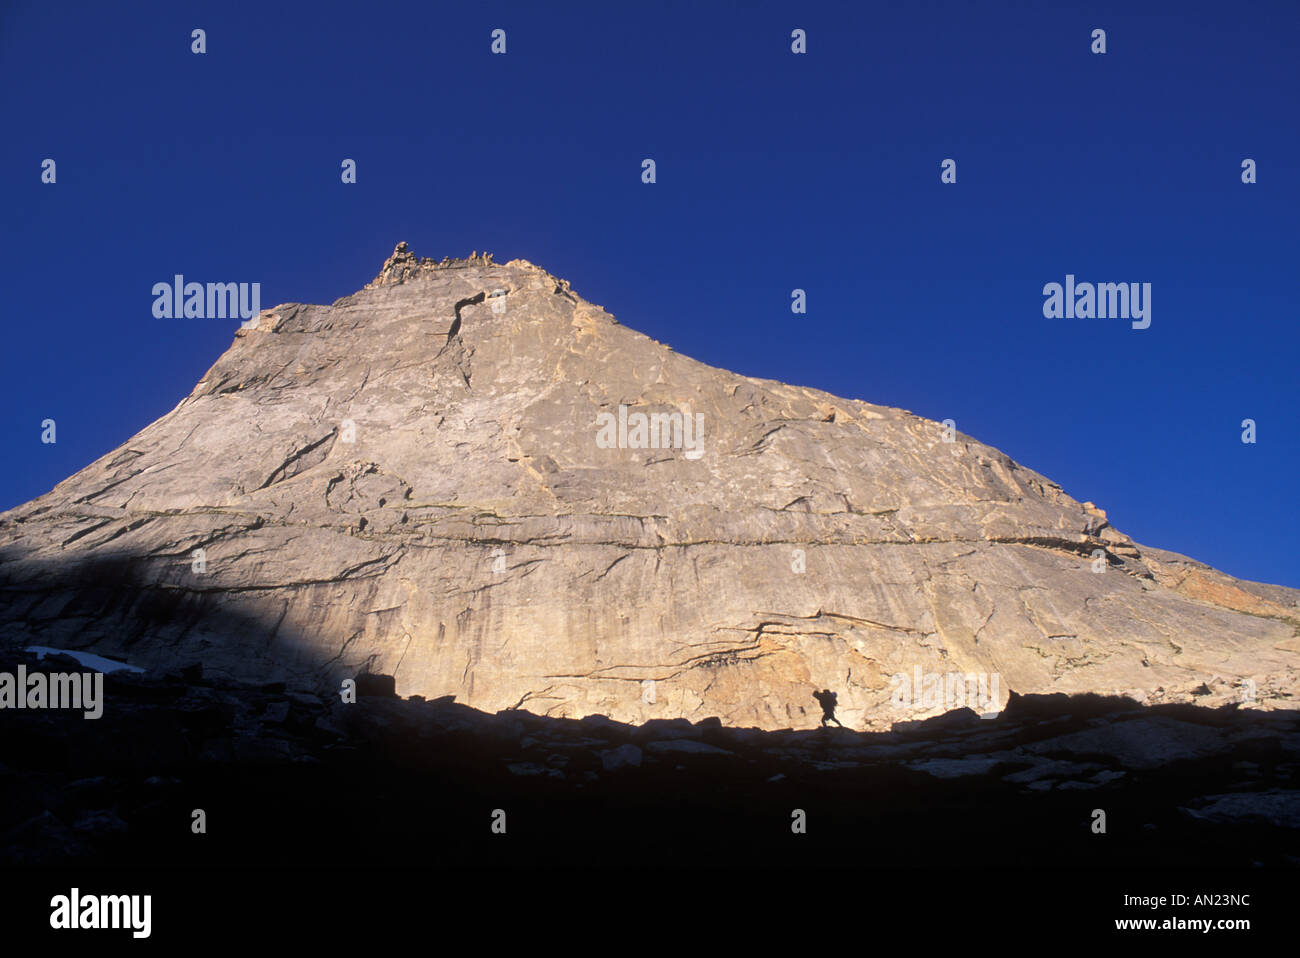 Hiker in front of a rock face Stock Photo